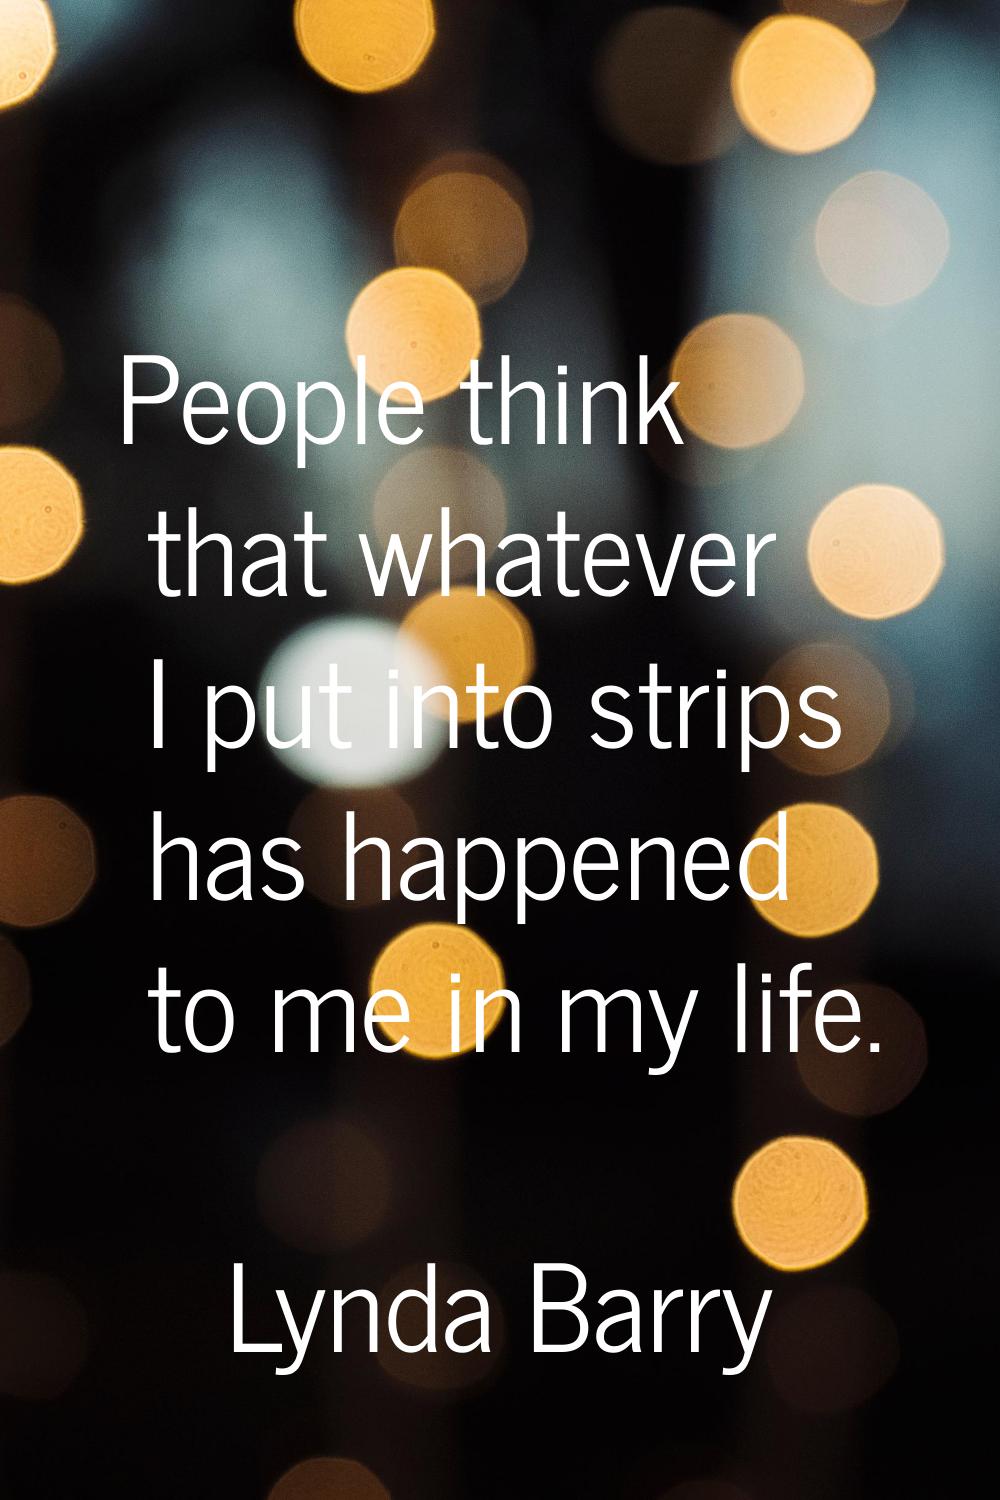 People think that whatever I put into strips has happened to me in my life.